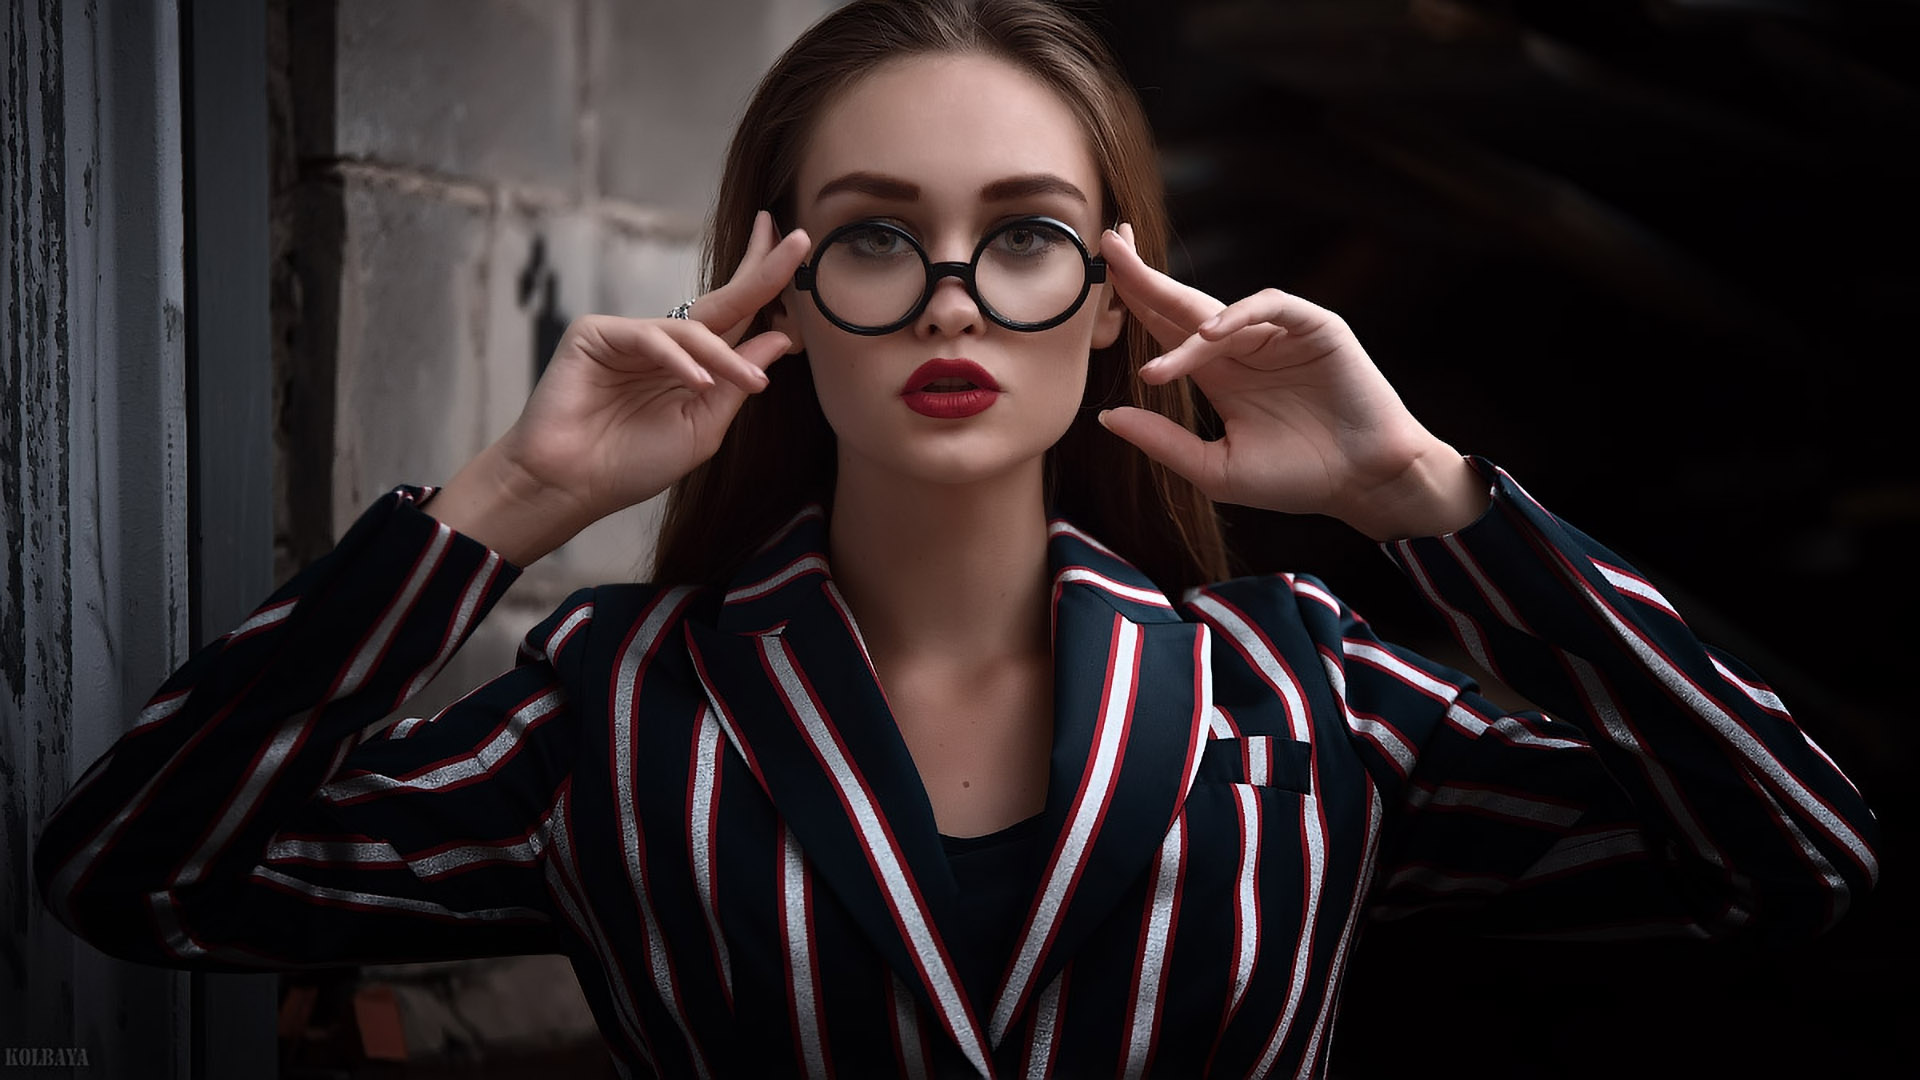 People 1920x1080 women portrait women with glasses red lipstick face touching glasses